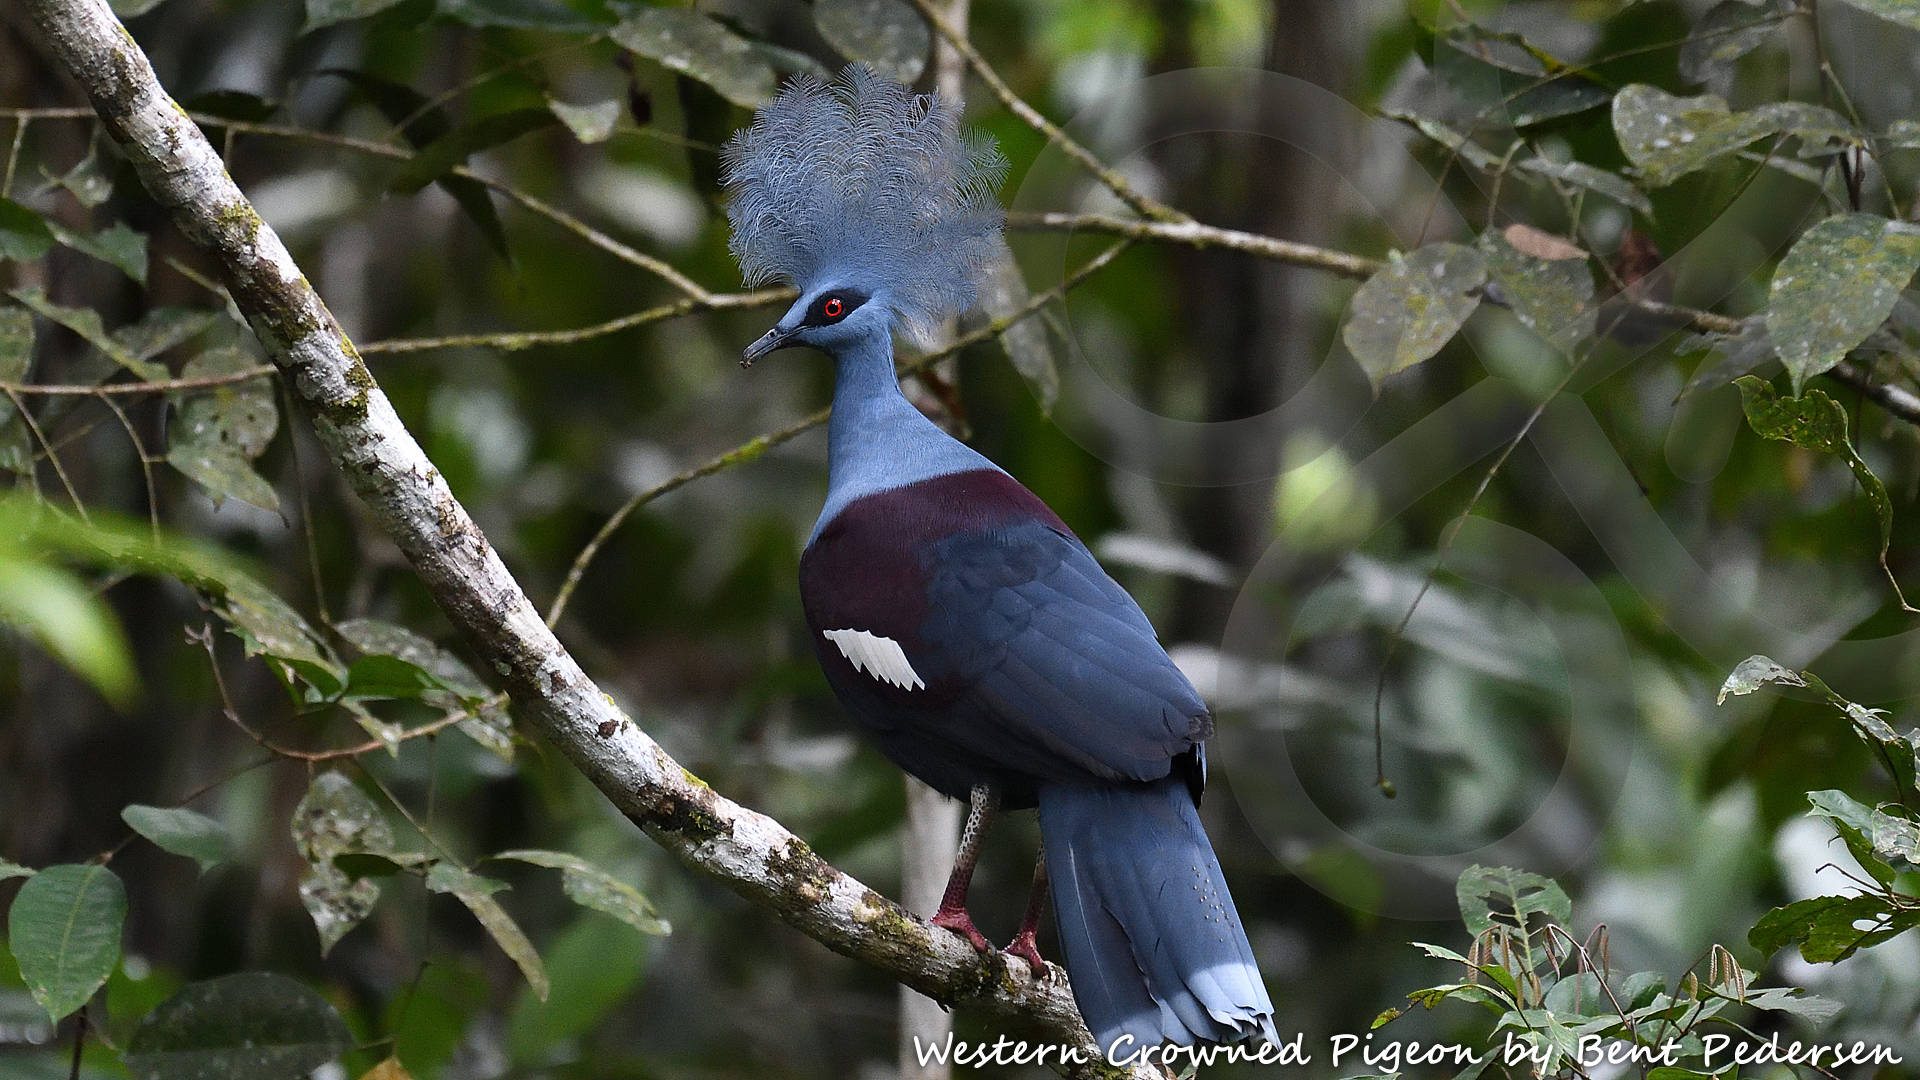 The majestic Western Crowned Pigeon Goura cristata is among 66 bird species that are endemic to West Papua and, except for an introduced population on the Moluccan island of Seram, occurs nowhere else on Earth. Copyright © Bent Pedersen